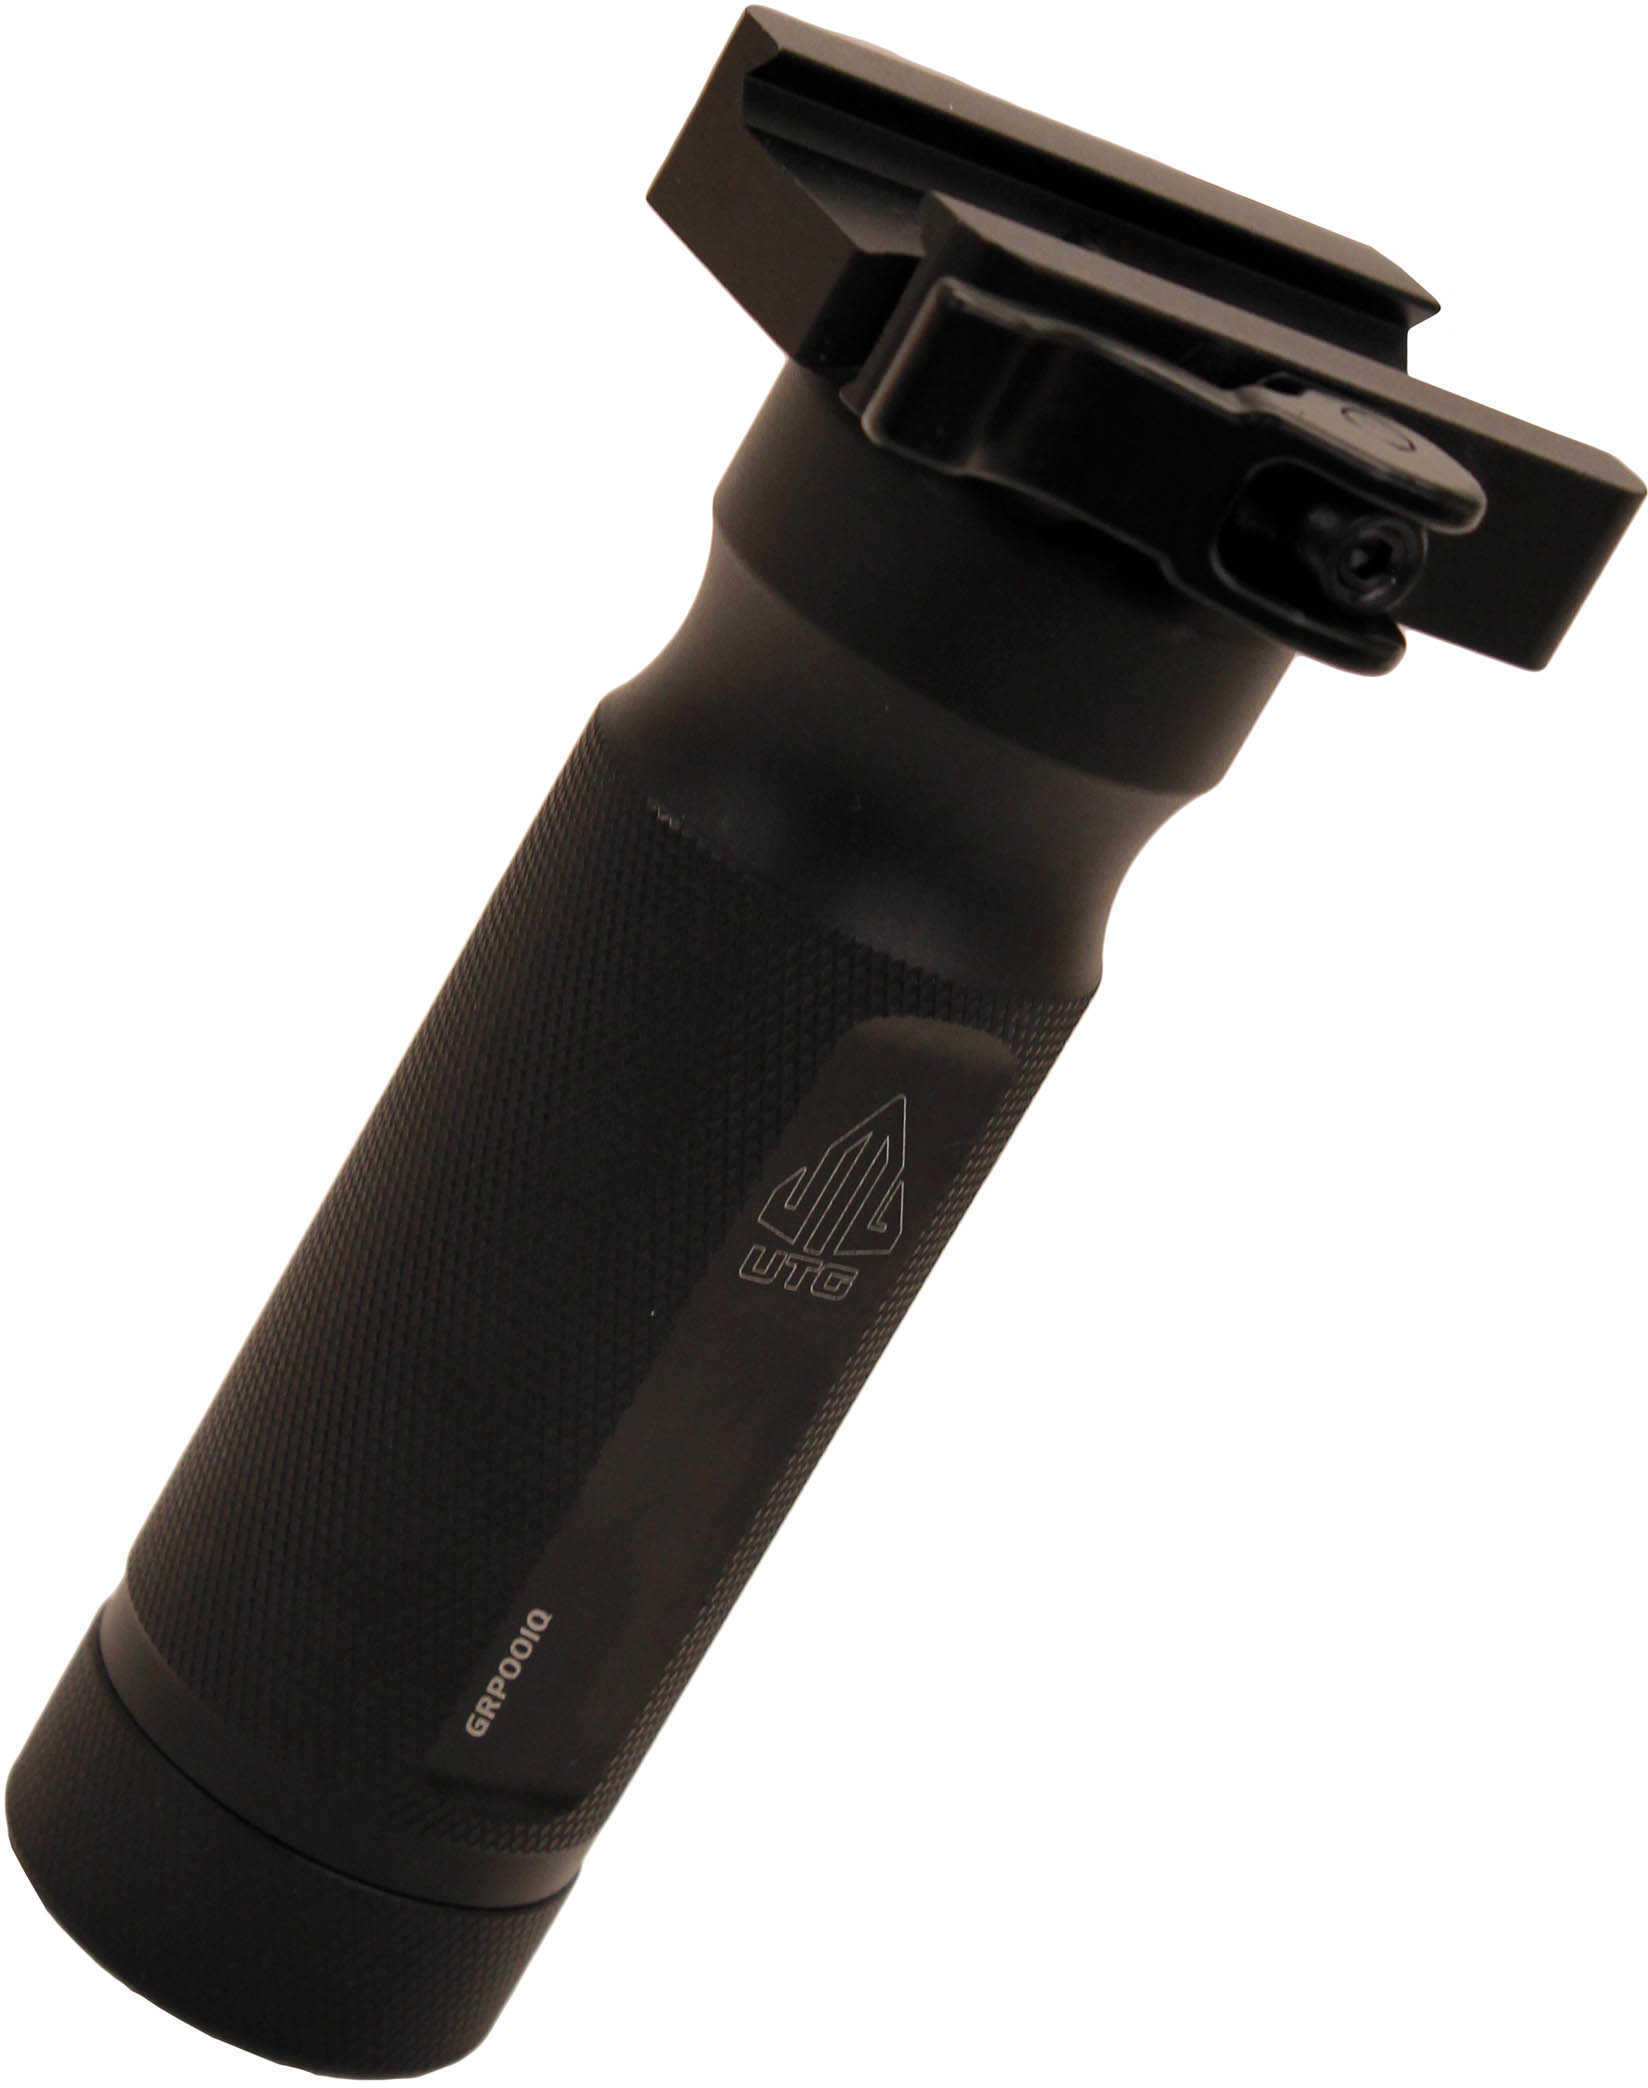 Leapers Inc. - UTG Model 4 Vertical Foregrip Fits Picatinny QD Lever Lock Combat Quality Metal with Quick Detac